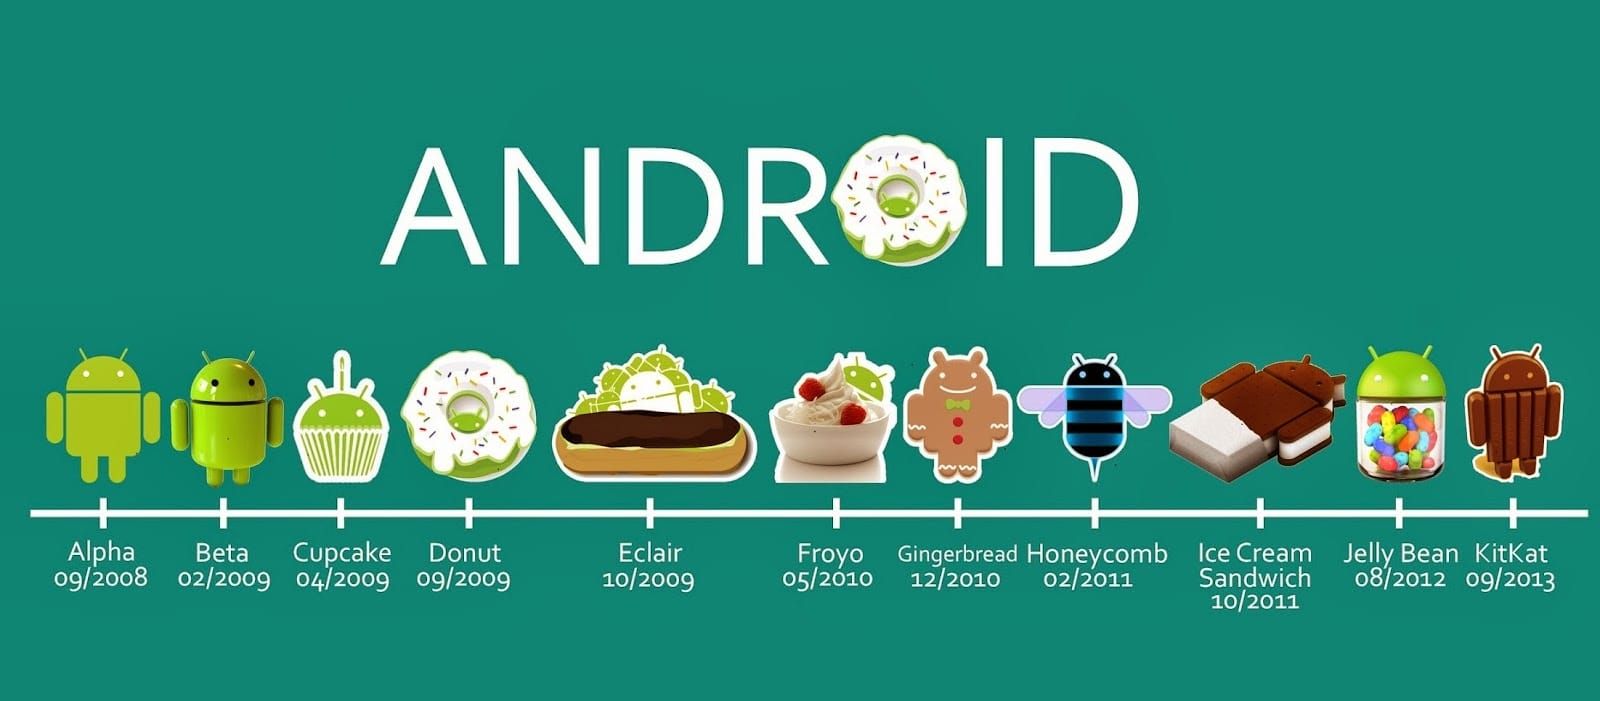 android-version-names-explained